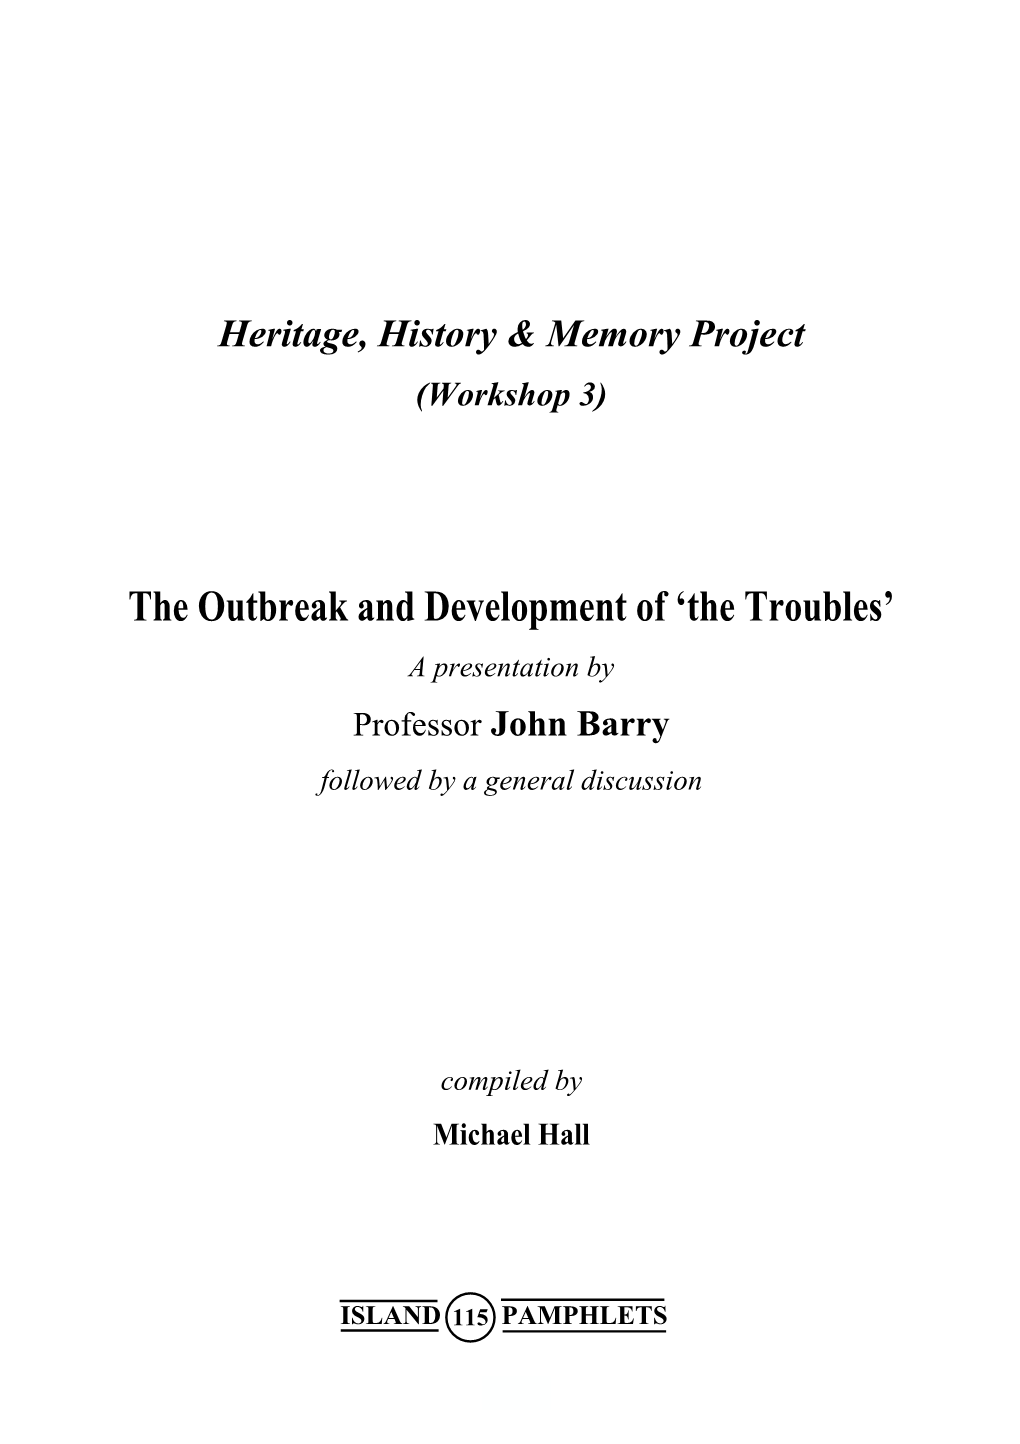 The Outbreak and Development of 'The Troubles'